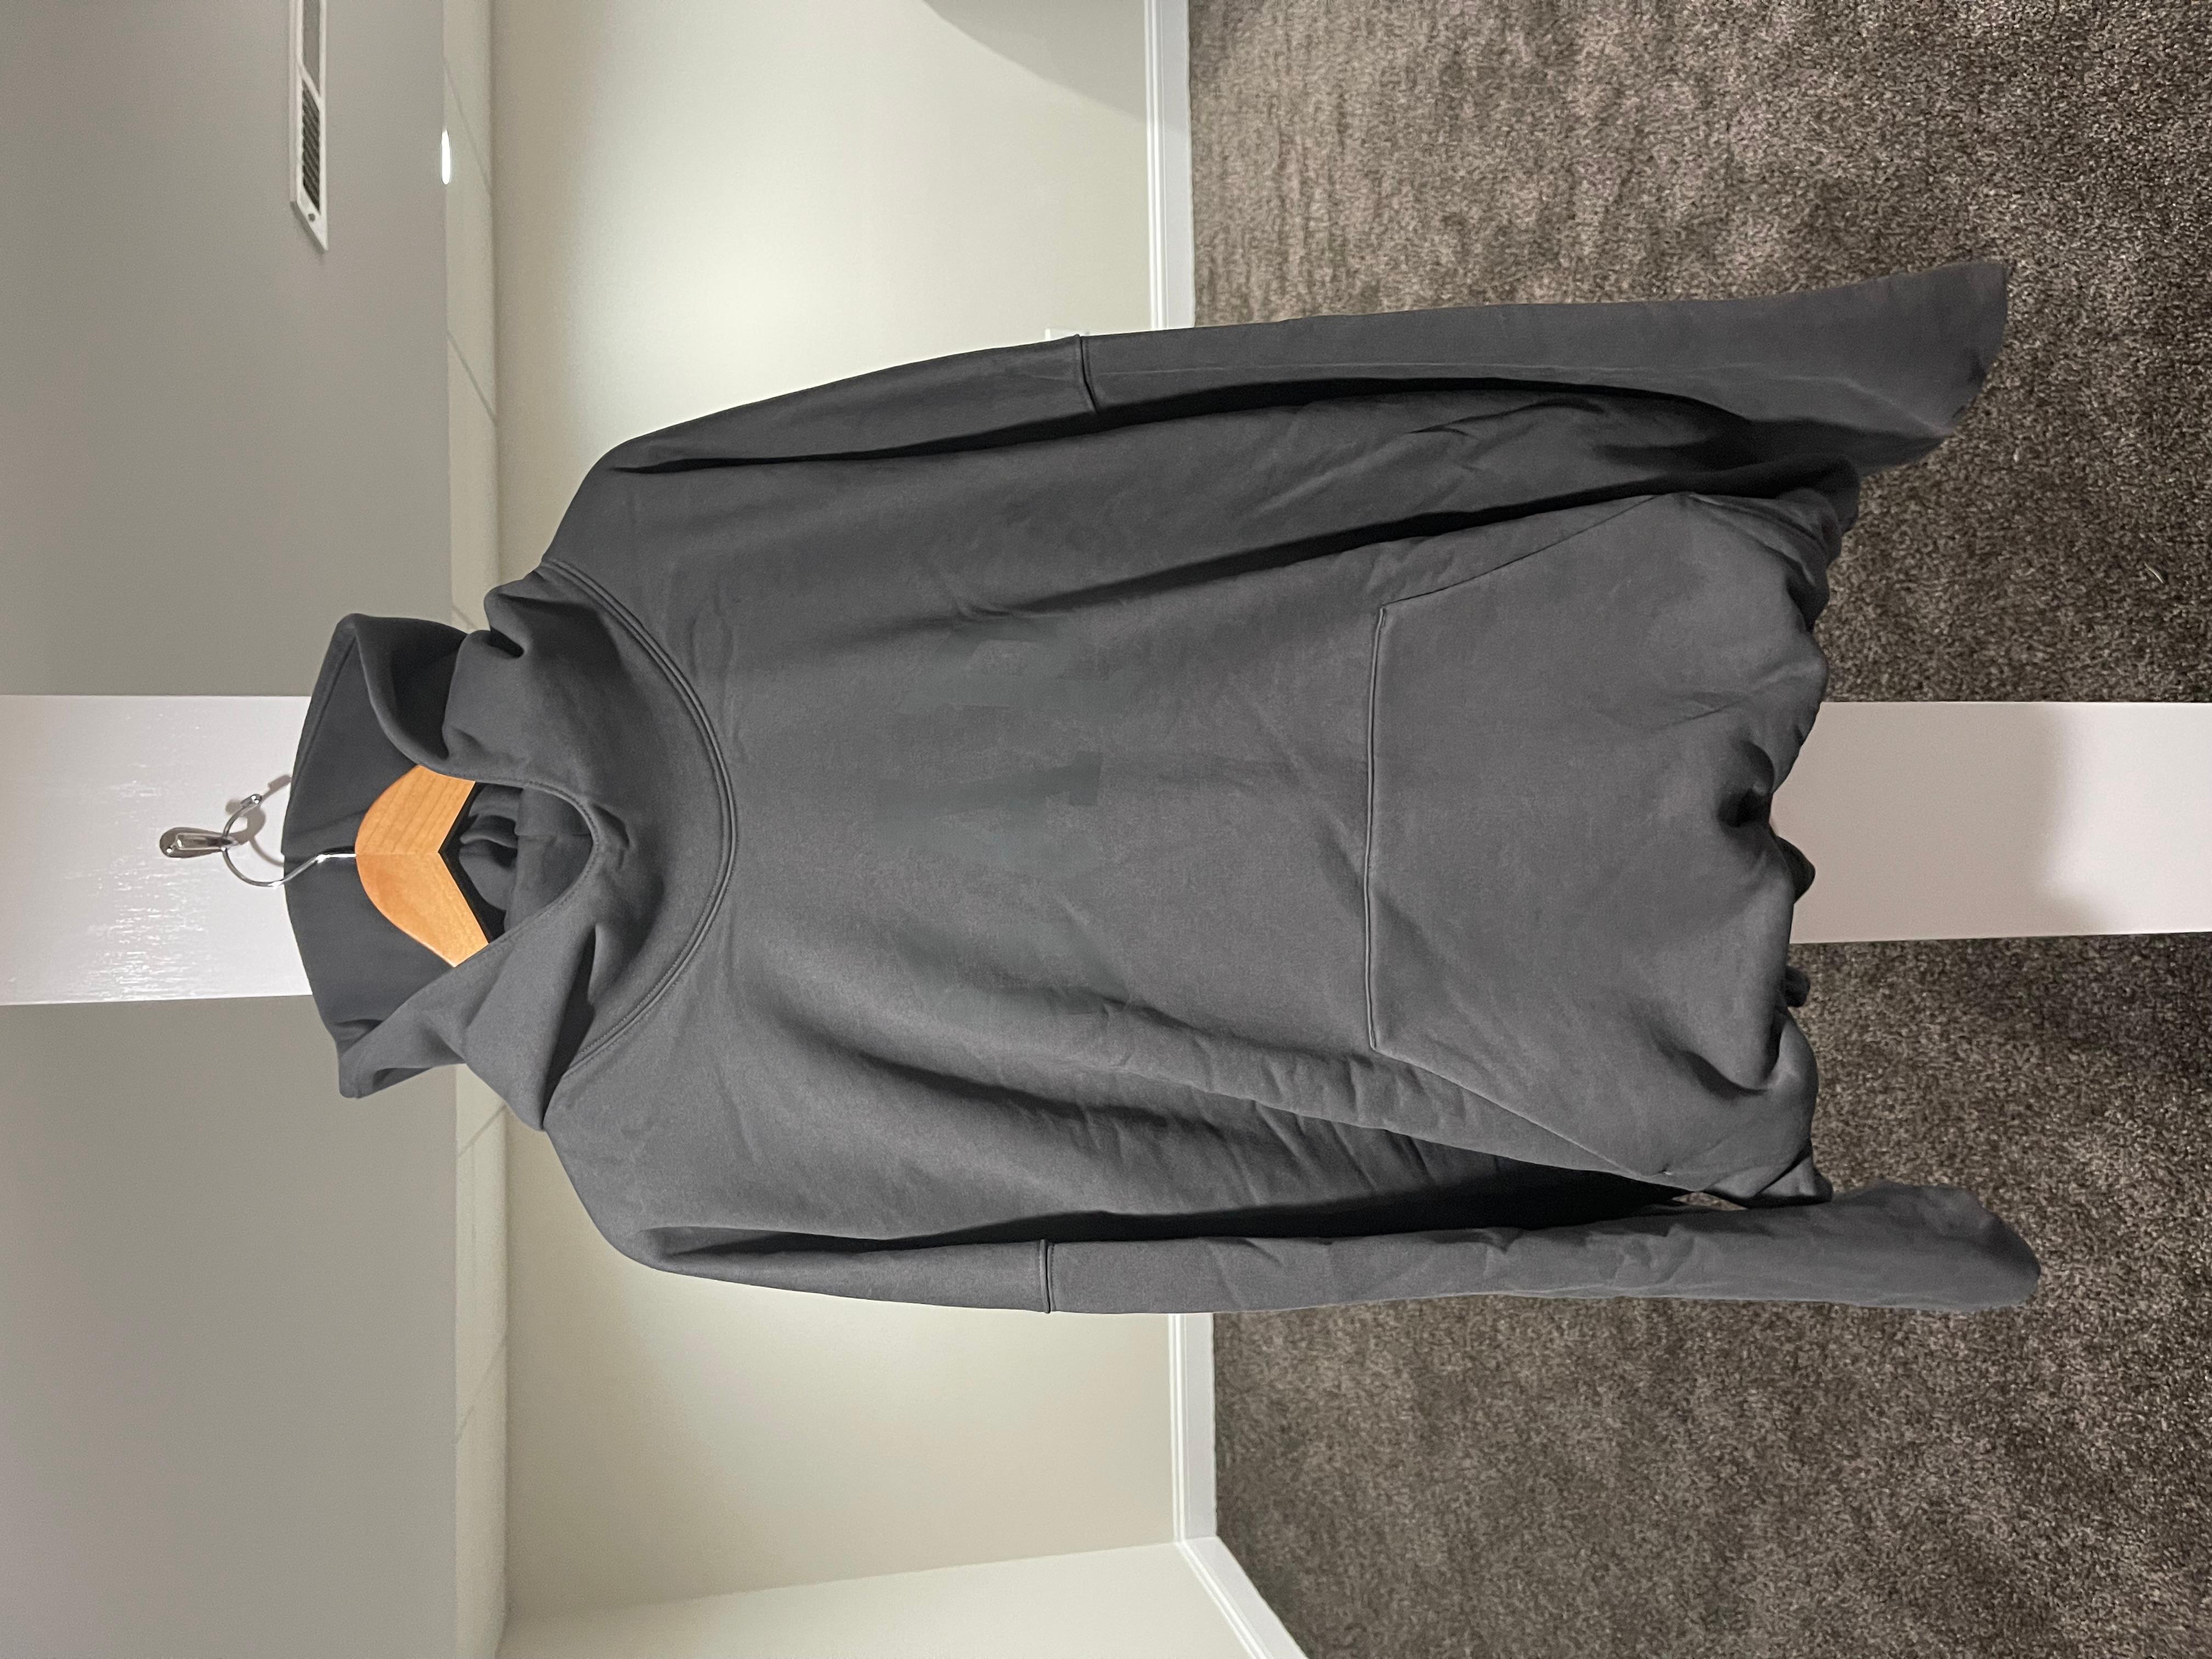 Gap x Balenciaga Oversized Dove Dark Grey Hoodie
Size XXL
Brand new

Measurements:
Chest: 34.5”
Length: 28.5”
Shoulders: 34.5”
Sleeve length: 23”


ALL SALES ARE FINAL